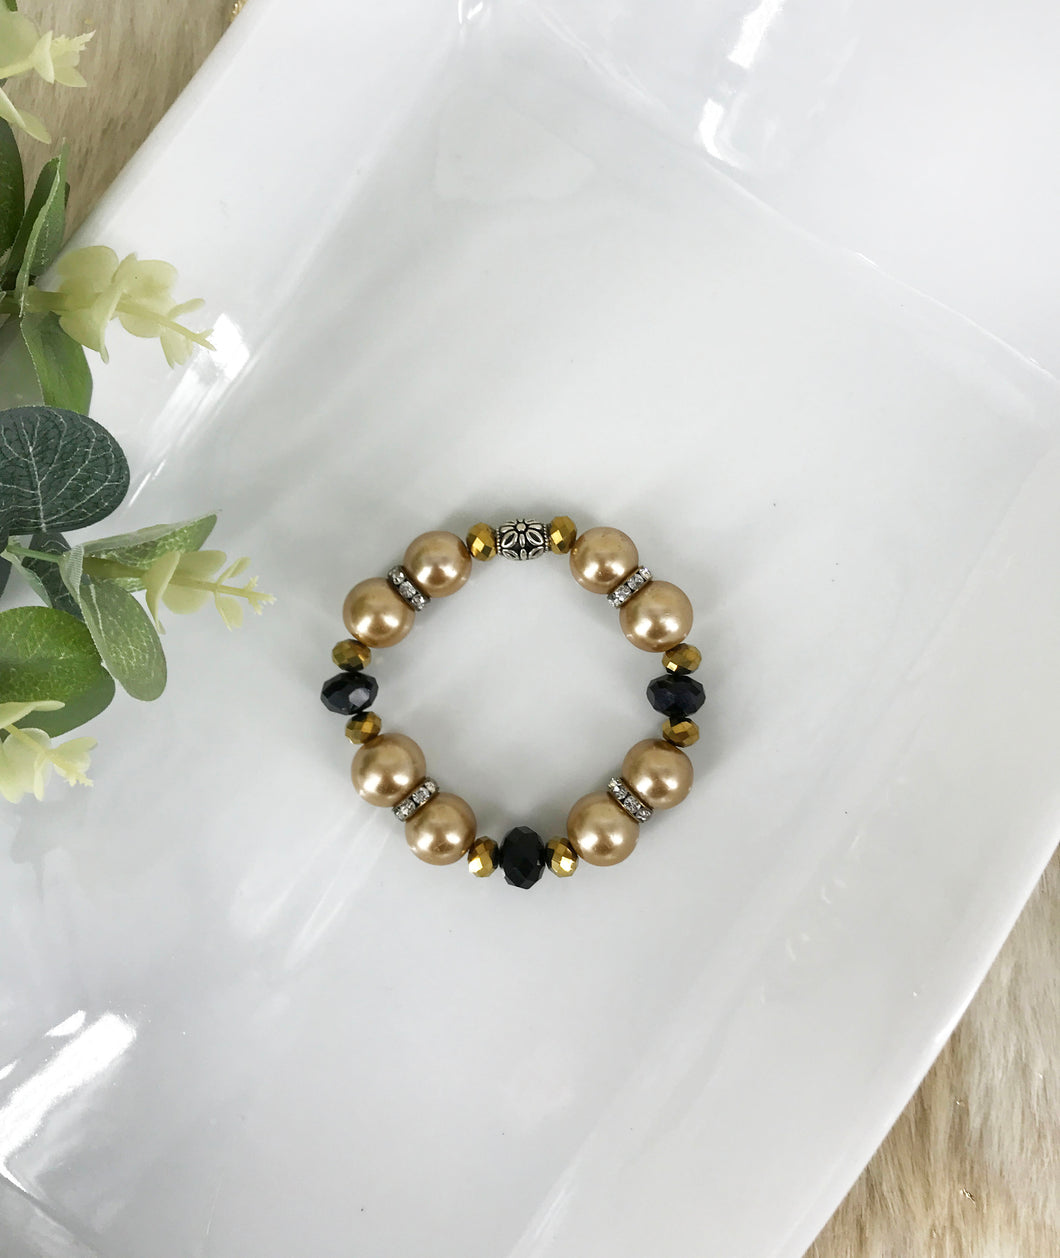 Glass Bead and Pearl Stretchy Bracelet - B1440